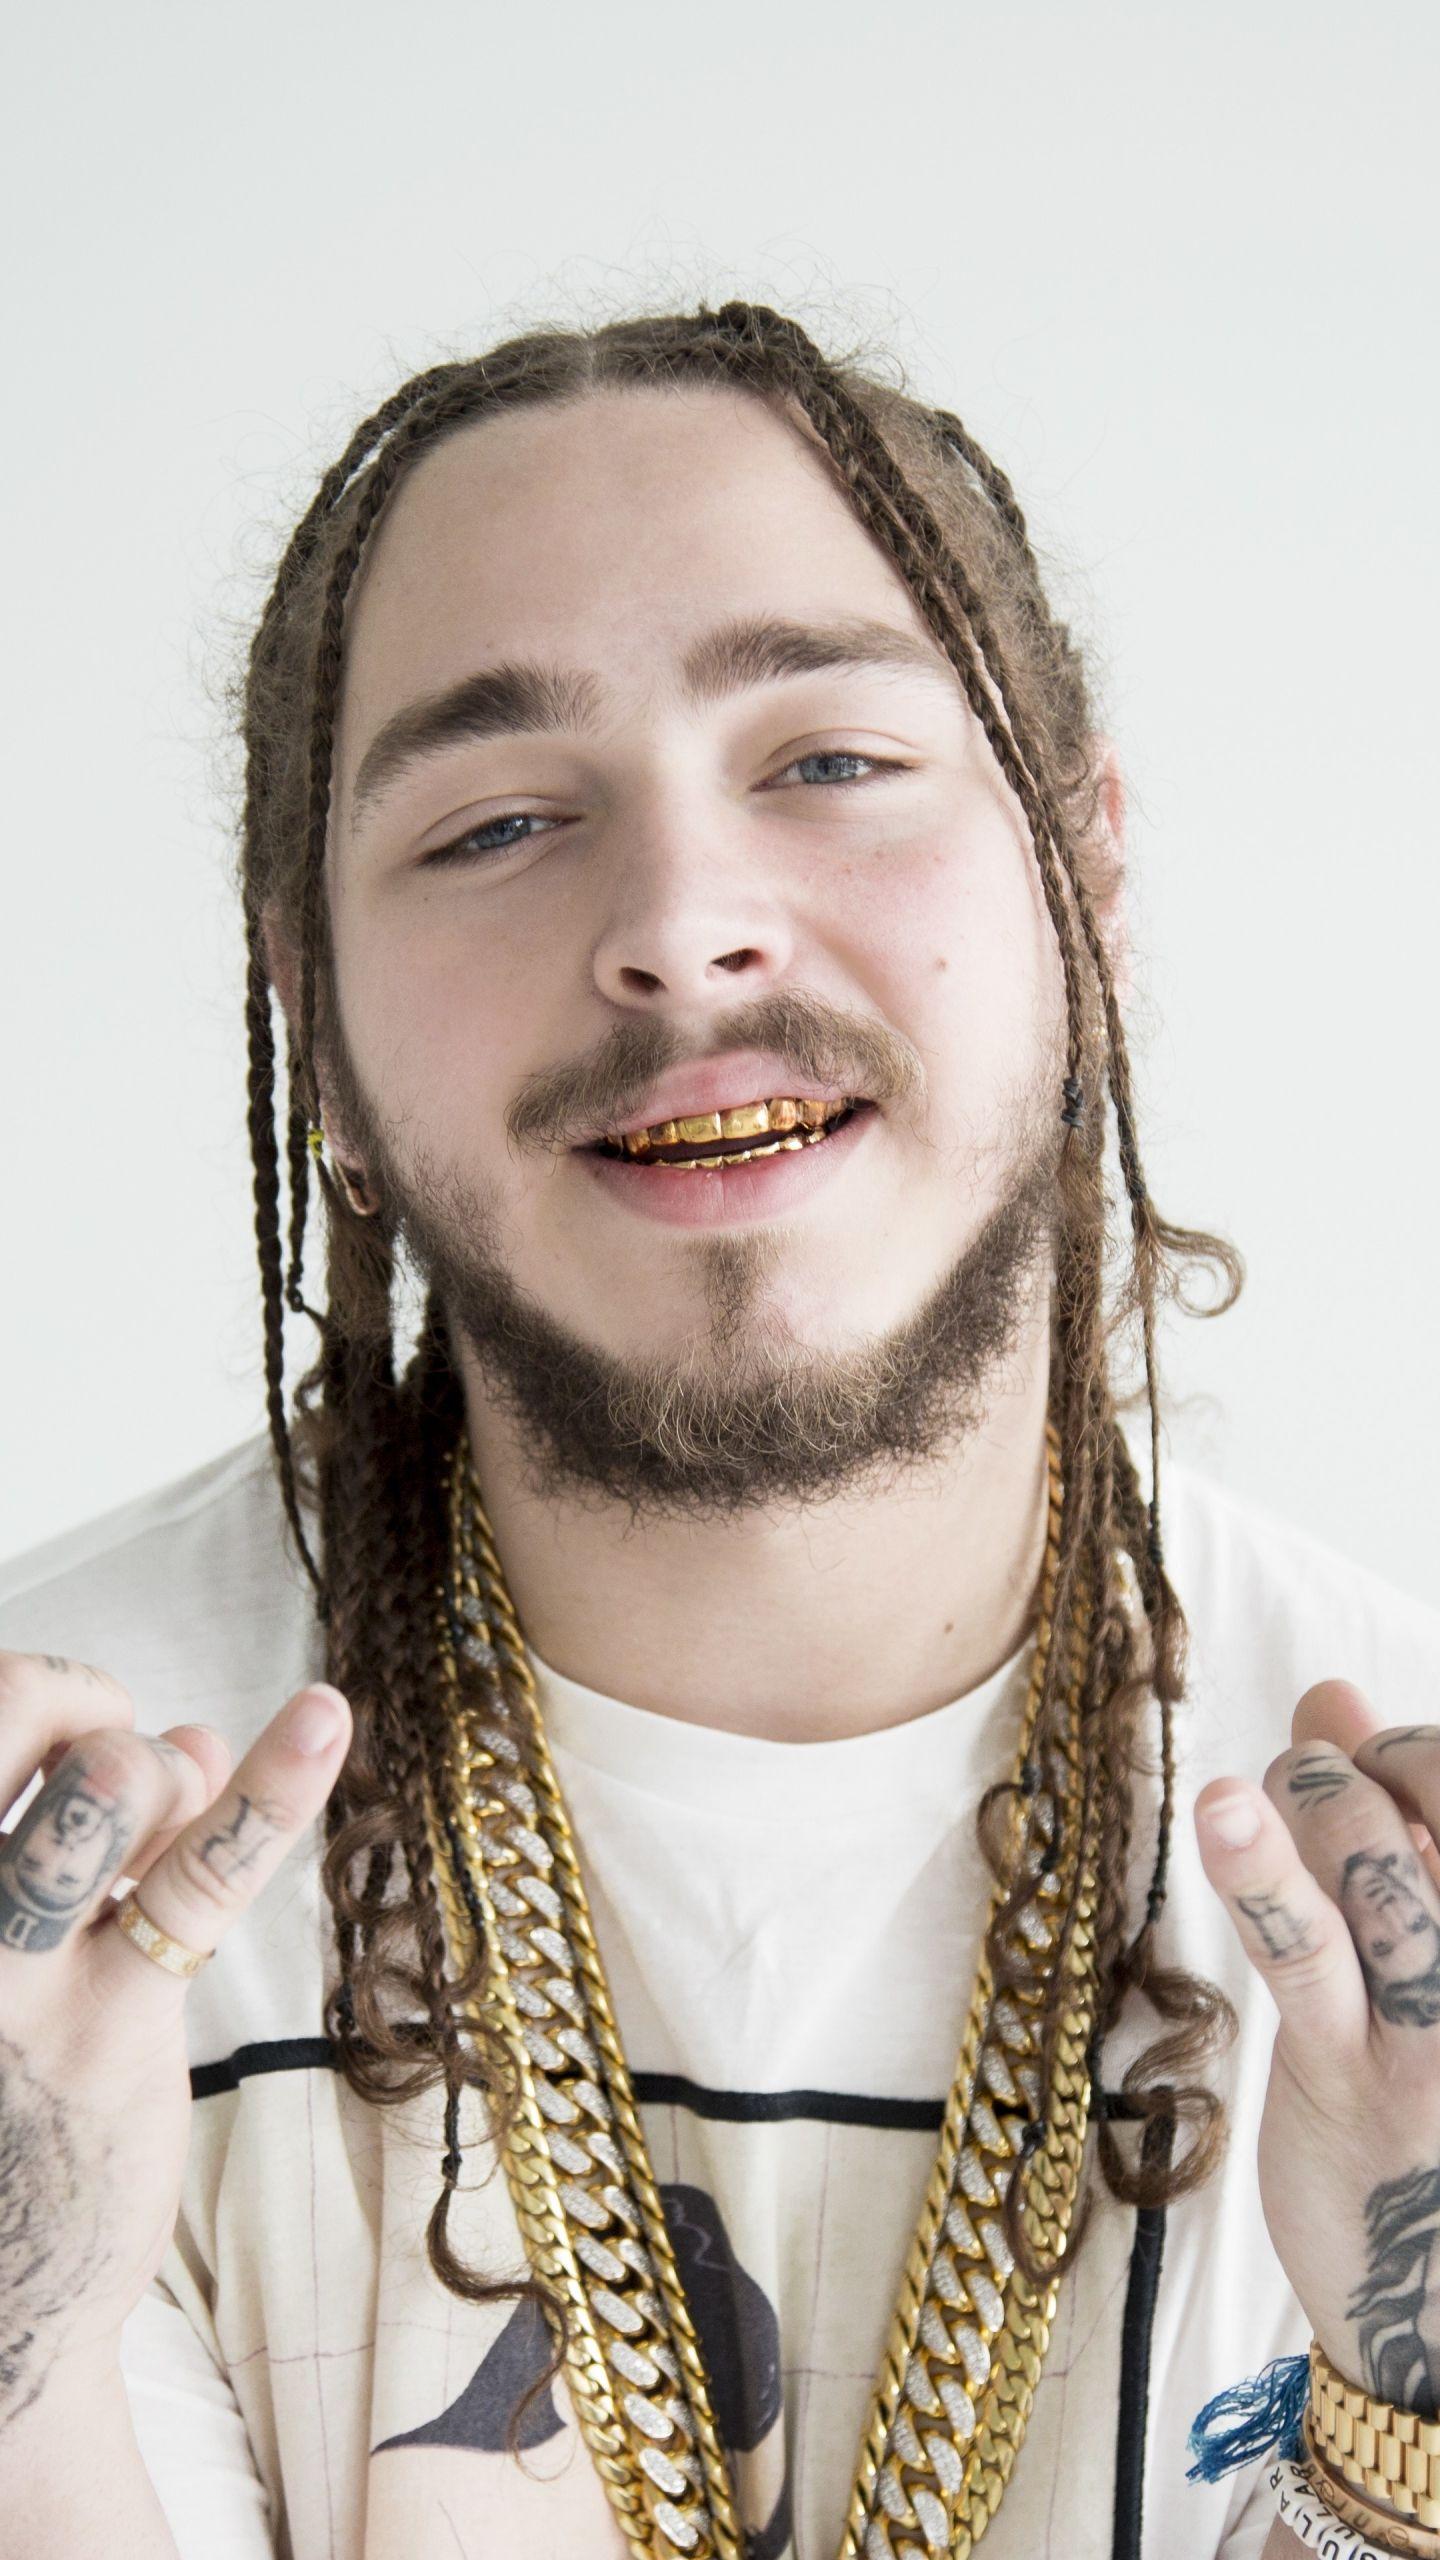 Post Malone Wallpapers - Top Free Post Malone Backgrounds ...